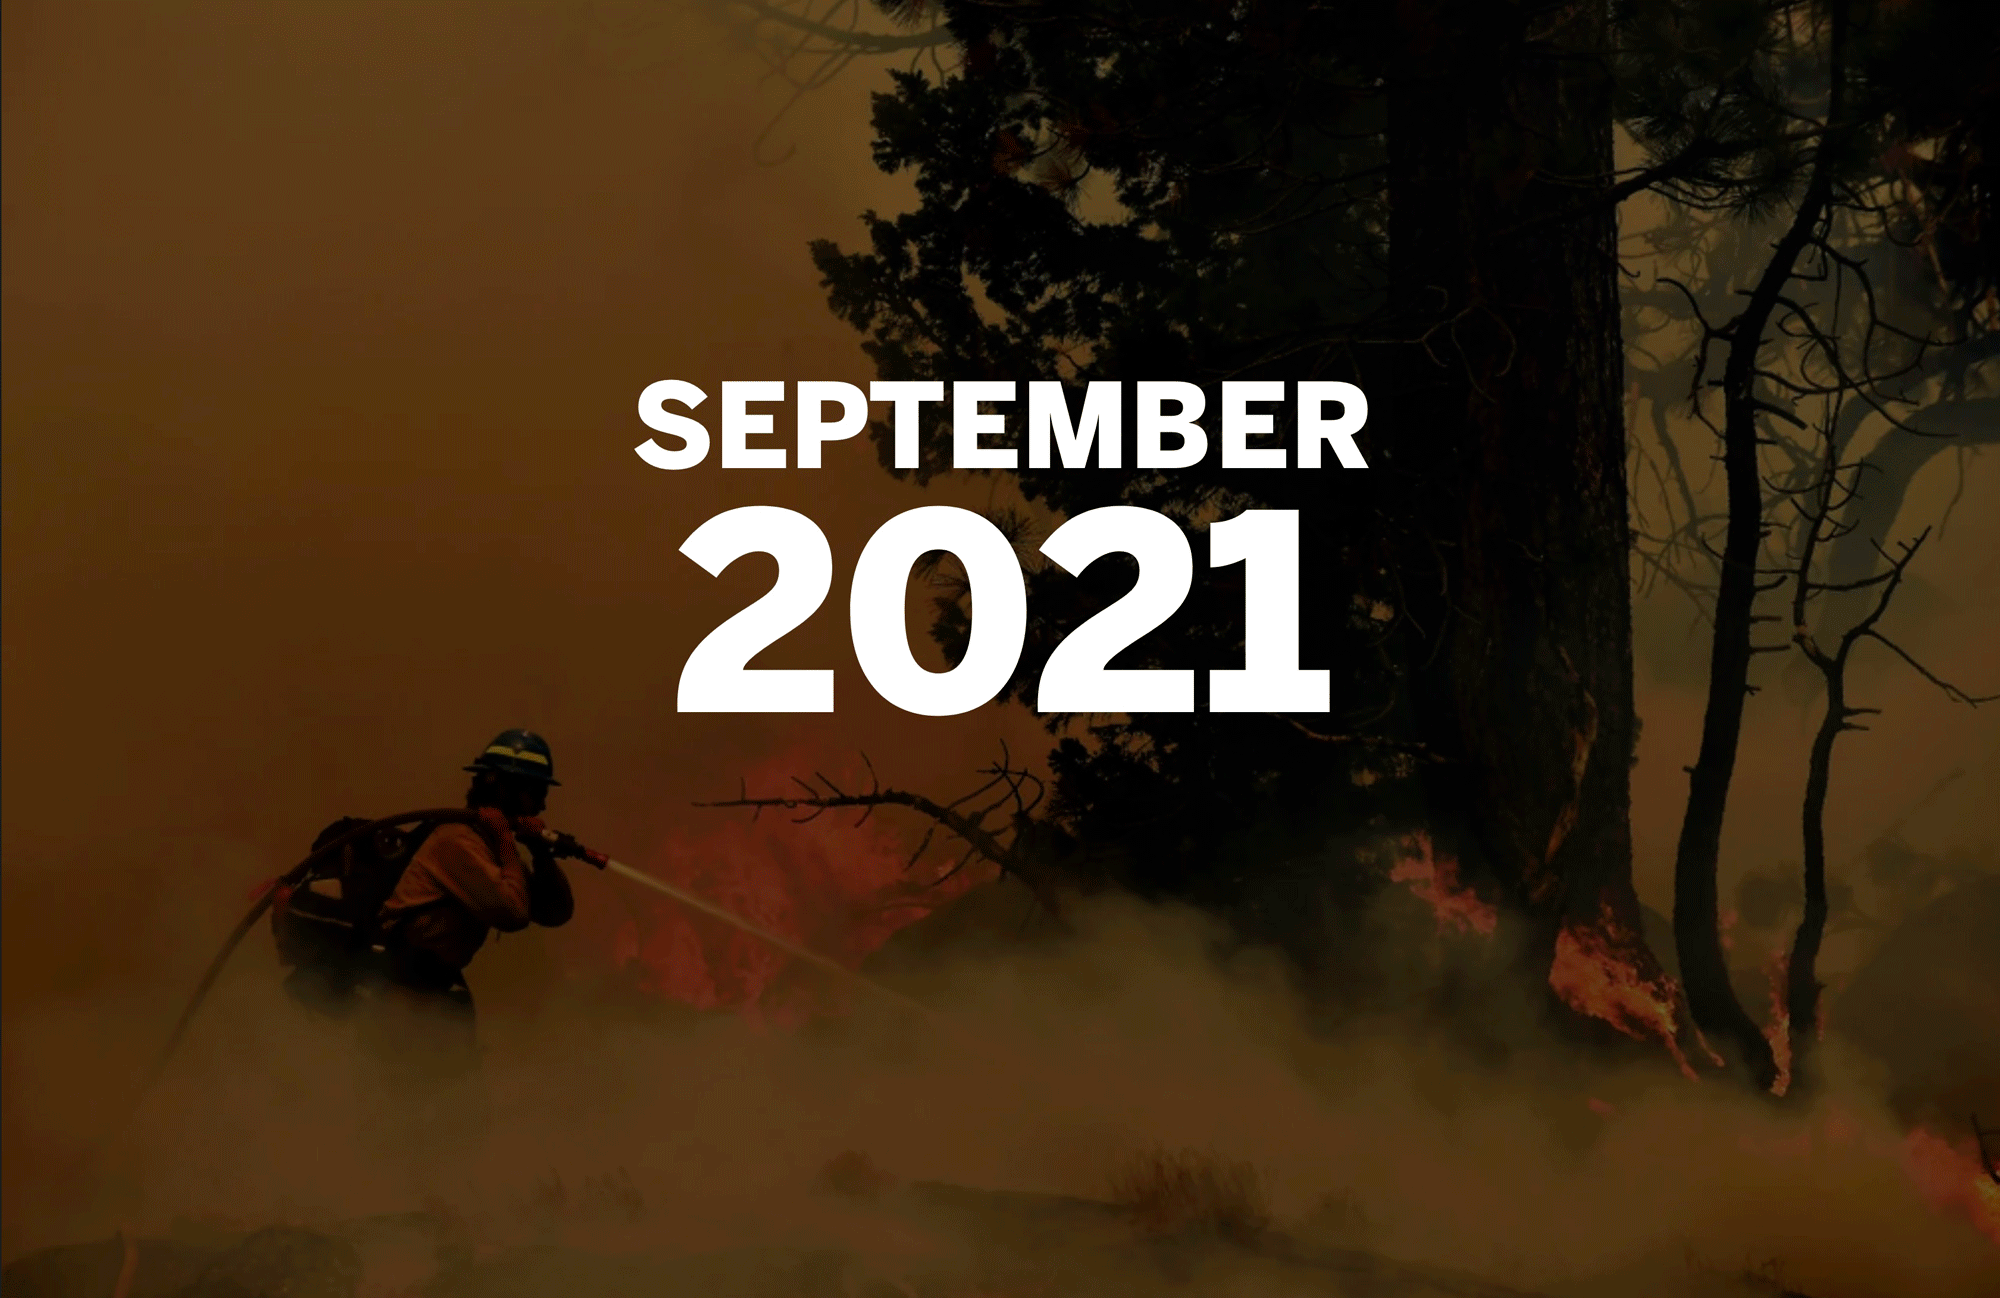 Sept. 2: Firefighters try to control a back fire to help battle the Caldor fire amid smoke and trees